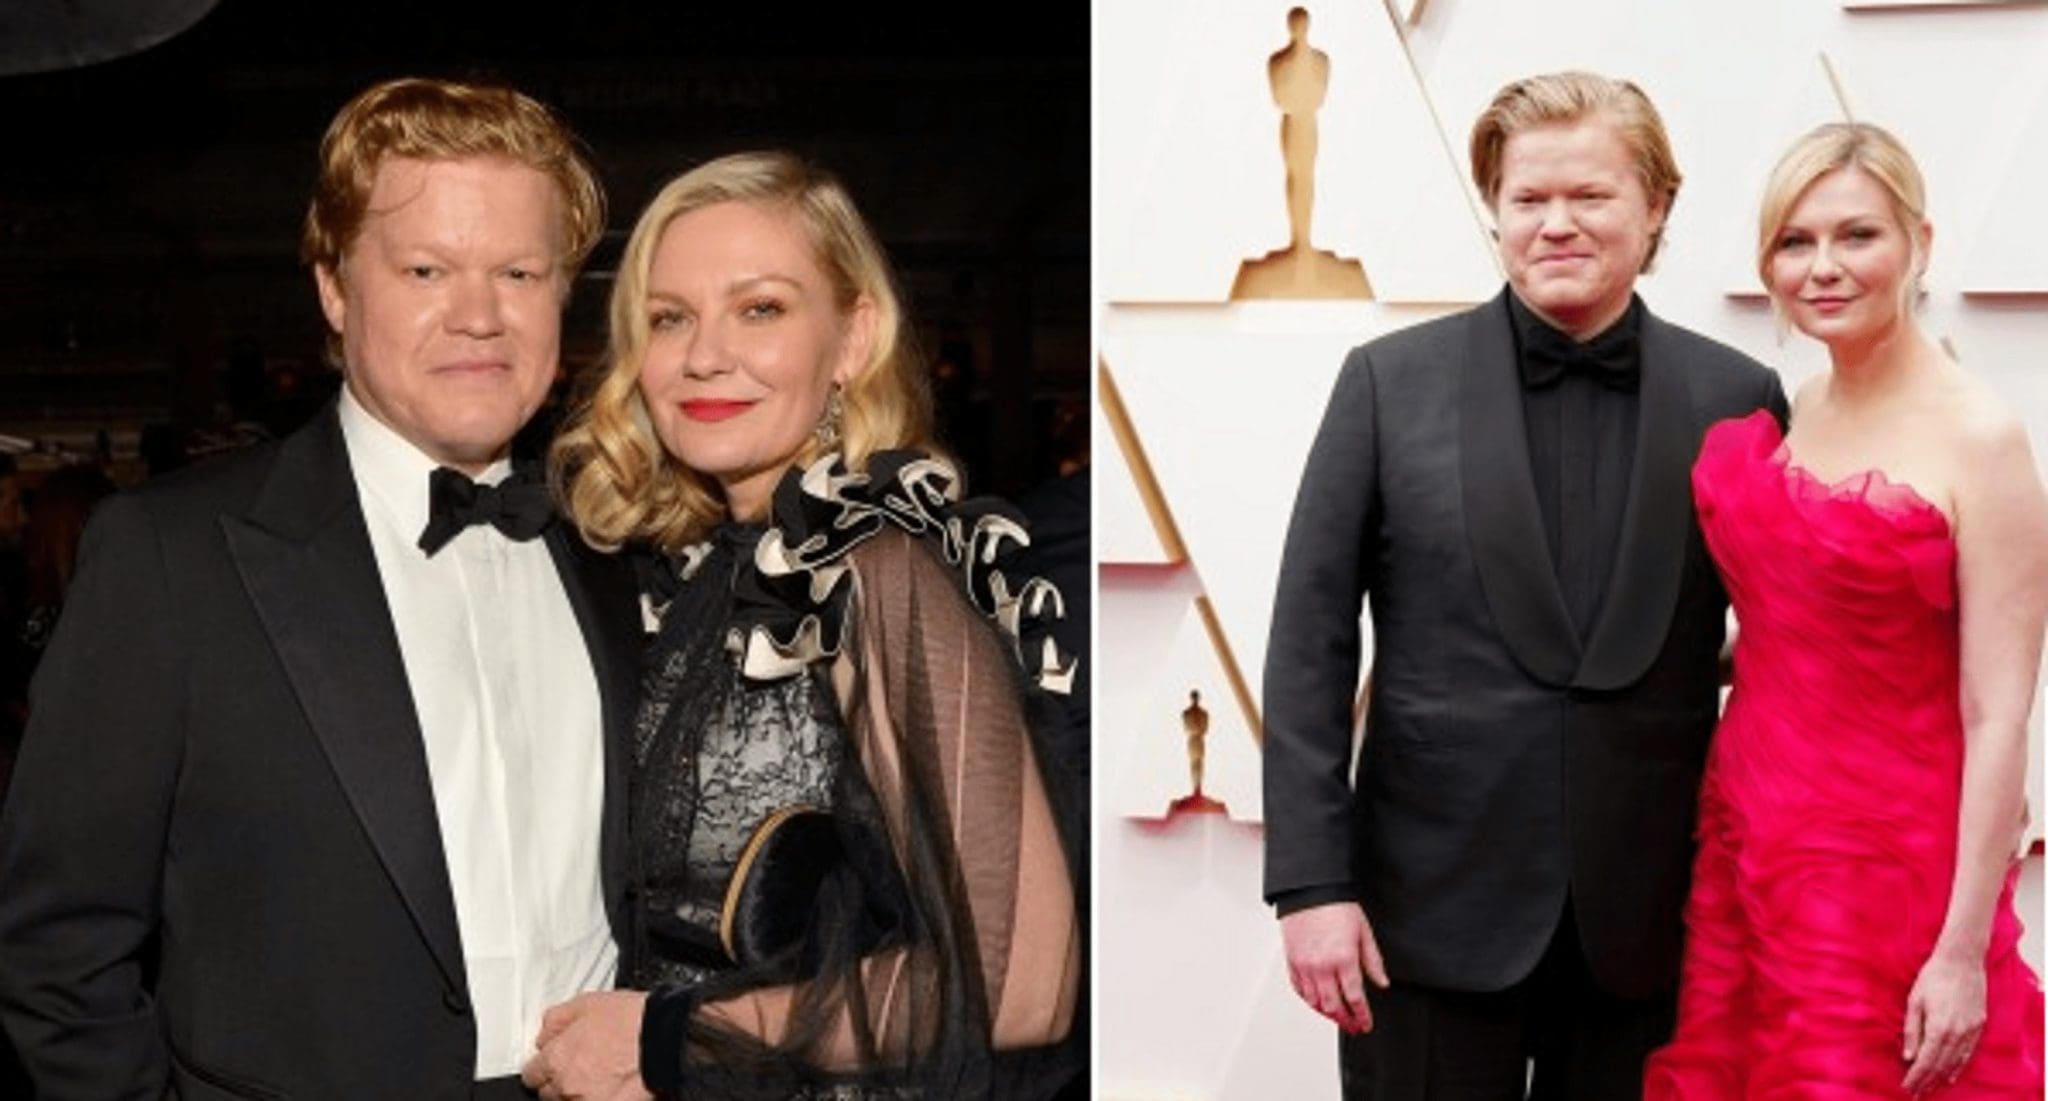 Kirsten Dunst Has Been Happily In a Relationship With Actor Jesse Plemons For Six Years. And Finally Got Married